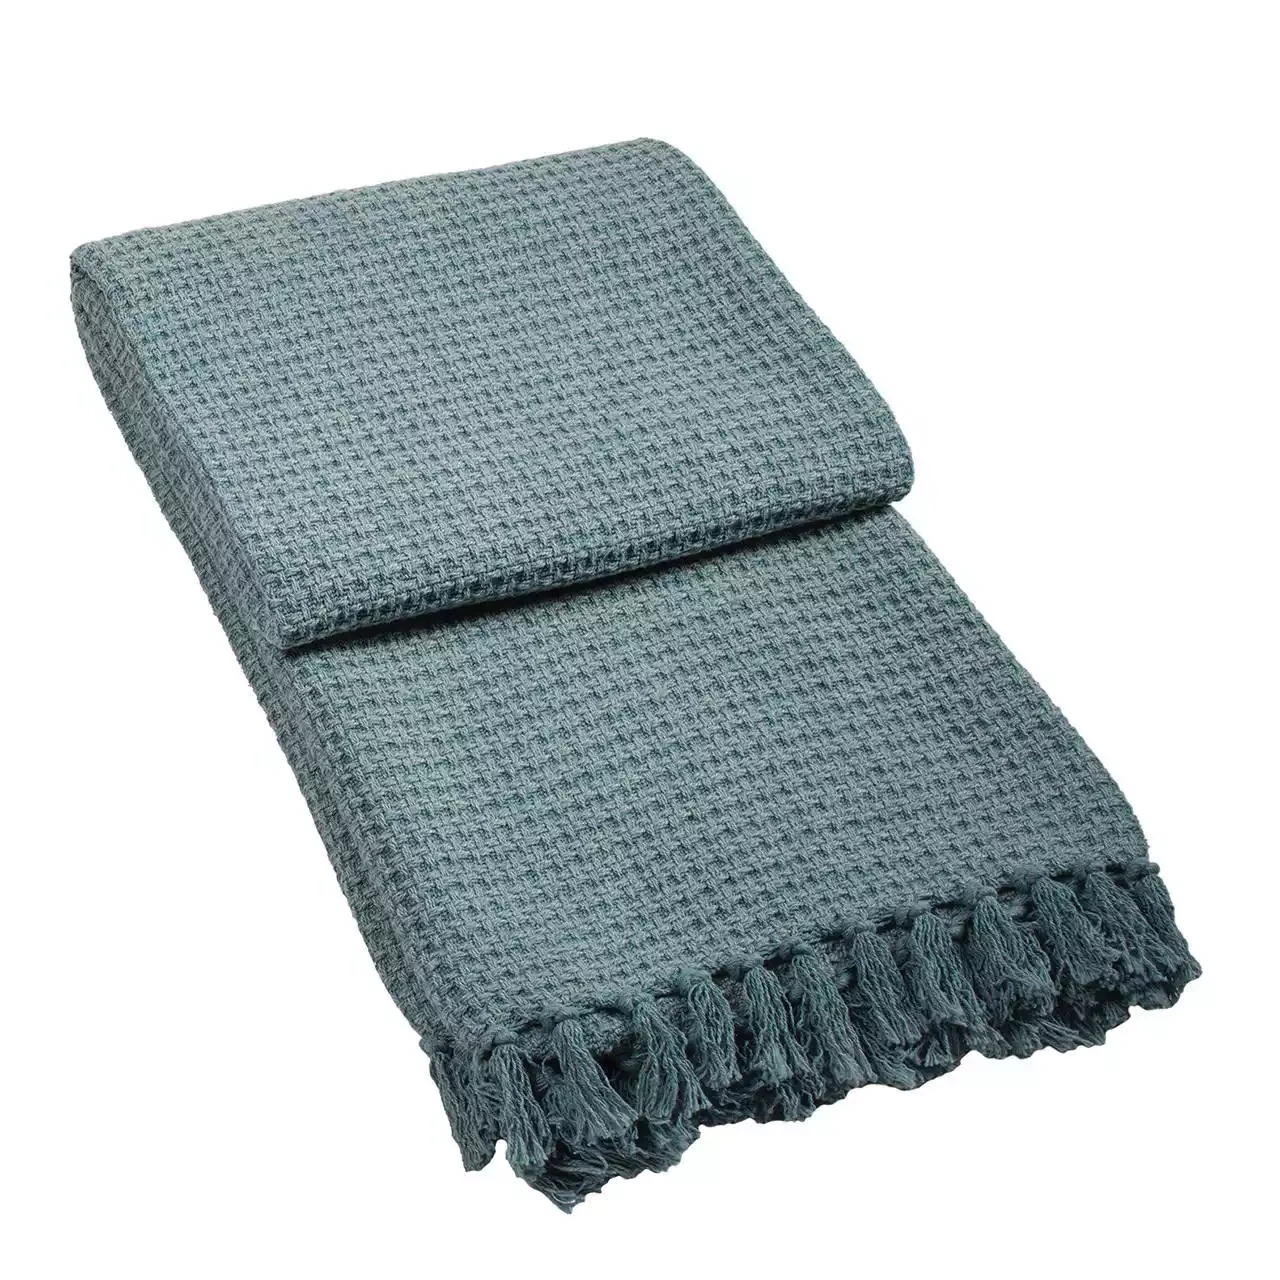 Cotton Waffle Throw With Tassels - 130x170cm - Blue by Namaste